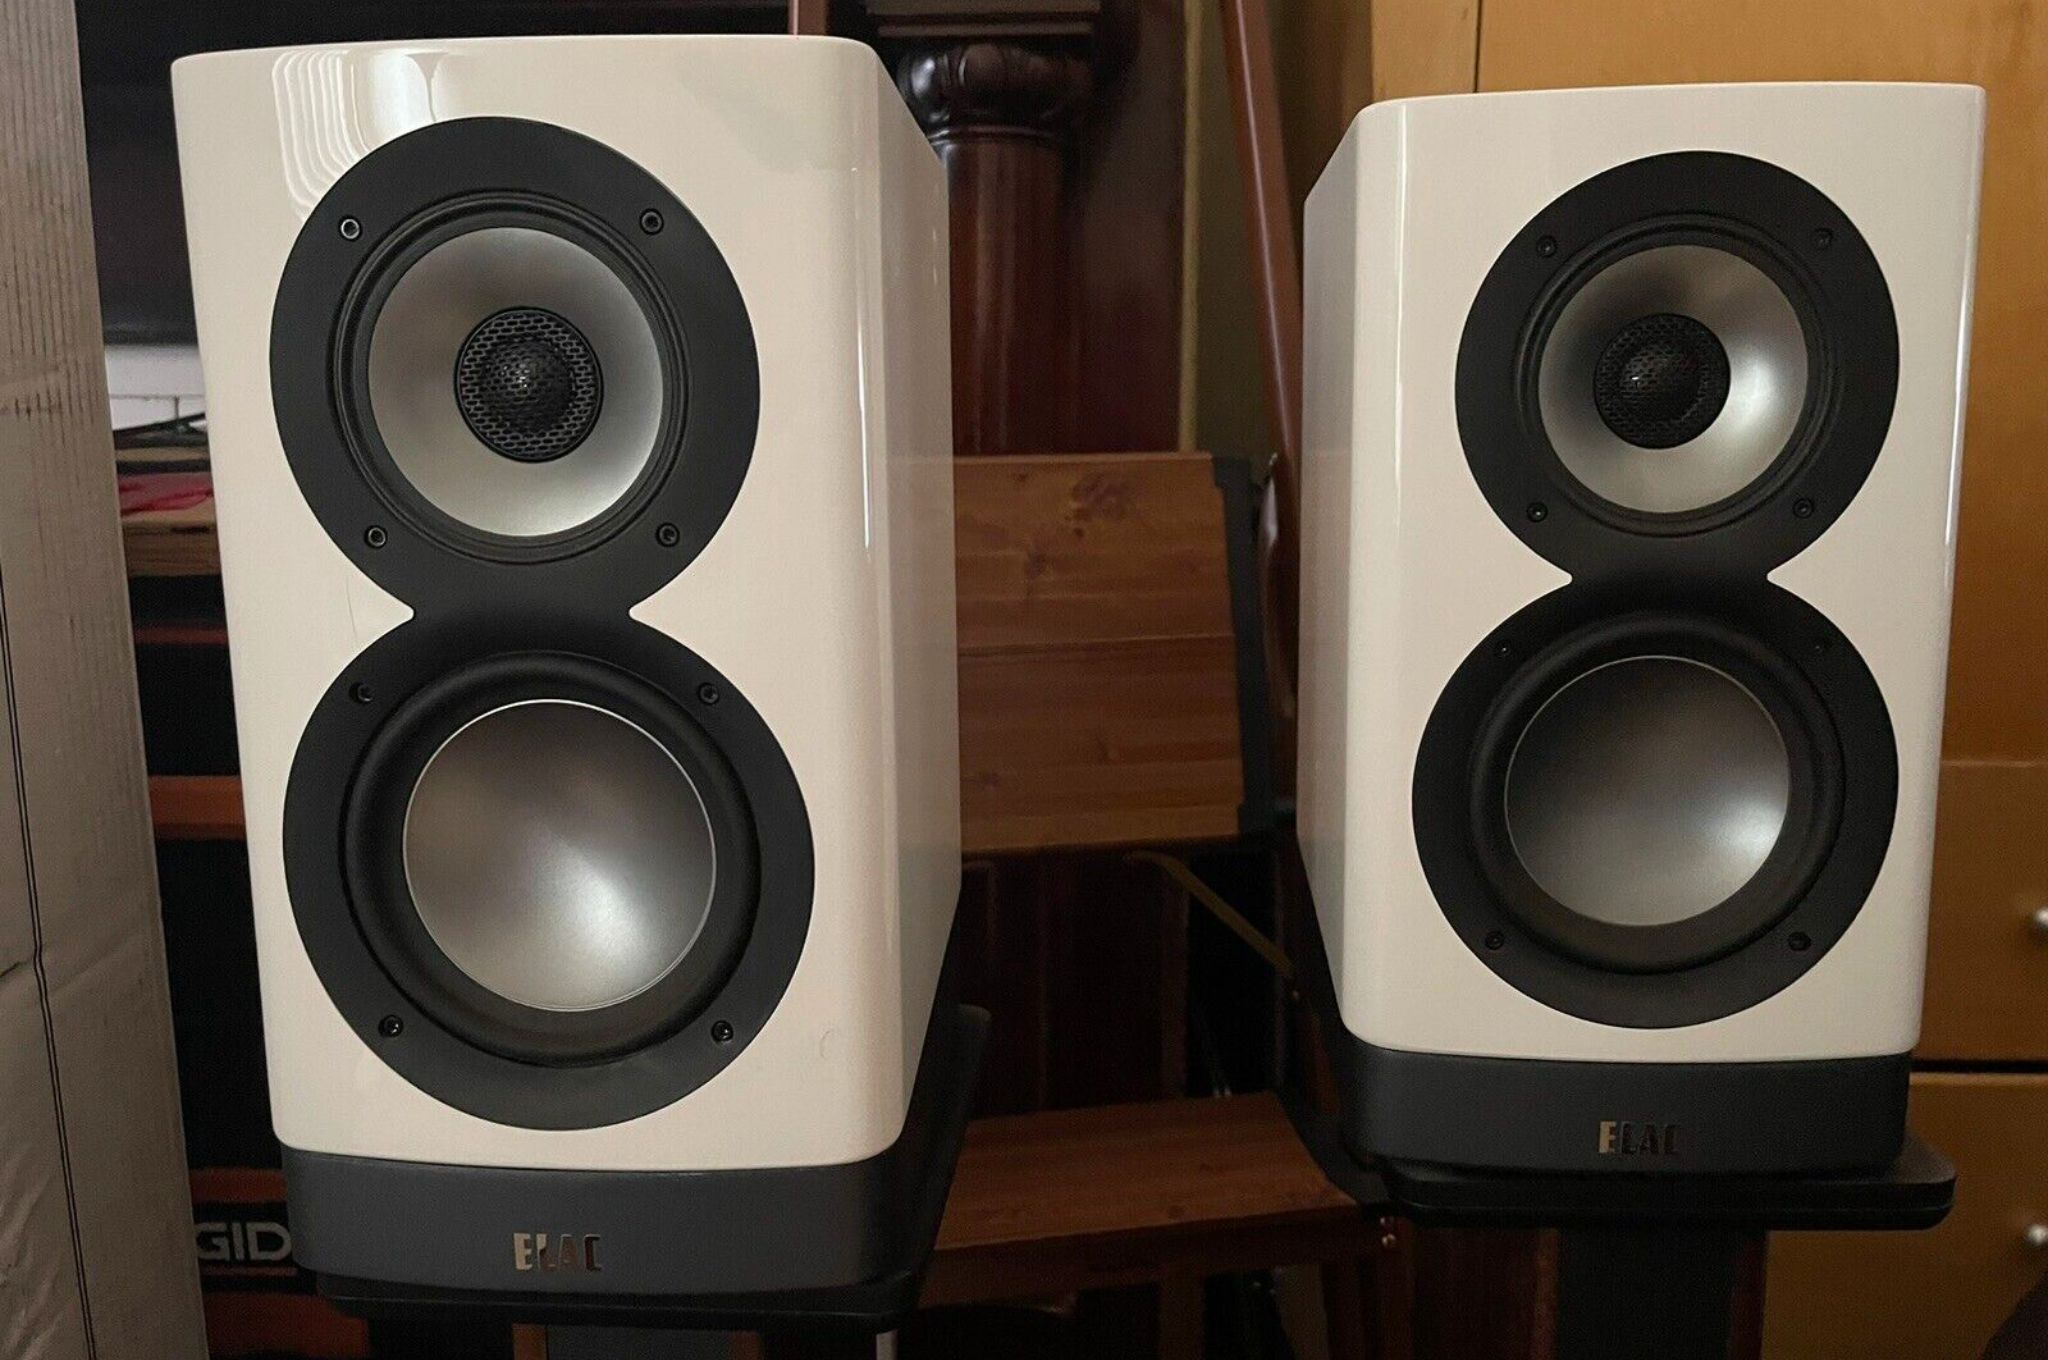 White ELAC ARB51-GB Navis speakers on stands